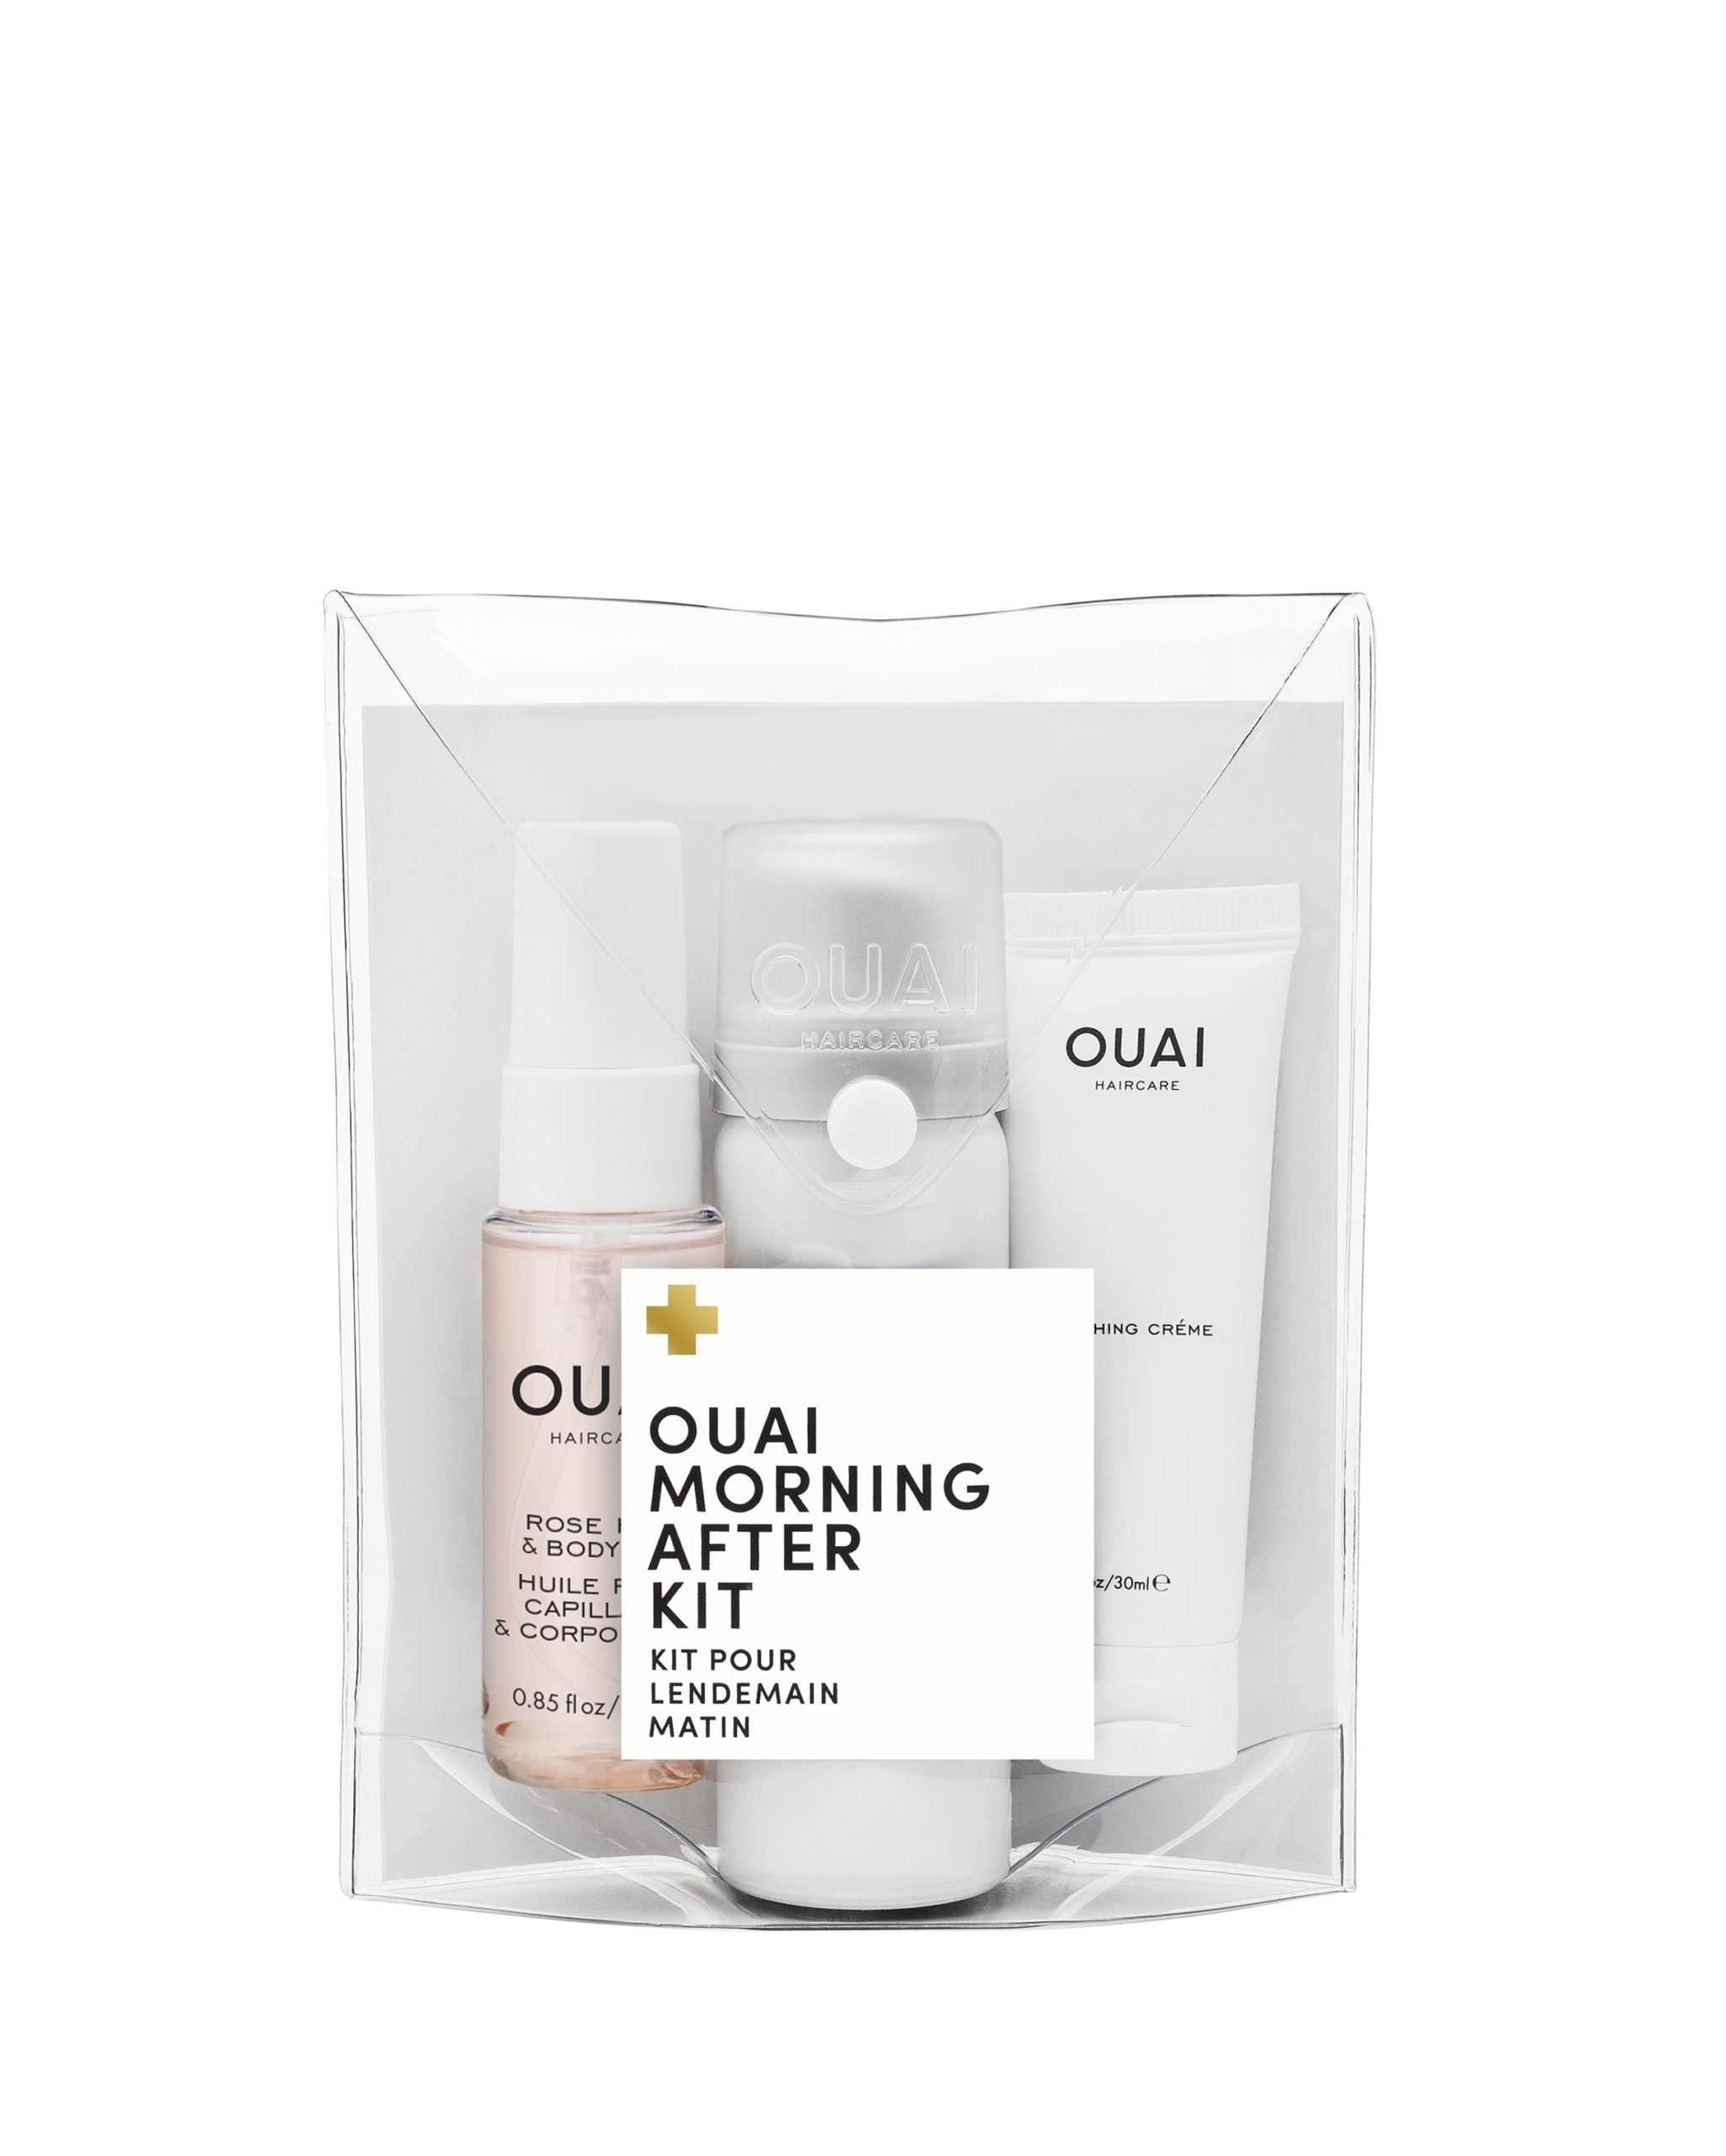 Review, Ingredients, Hairstyle, Haircare Trend 2017, 2018: OUAI Morning After Kit, Rose Hair Body and Oil, Dry Shampoo Foam, Finishing Crème,